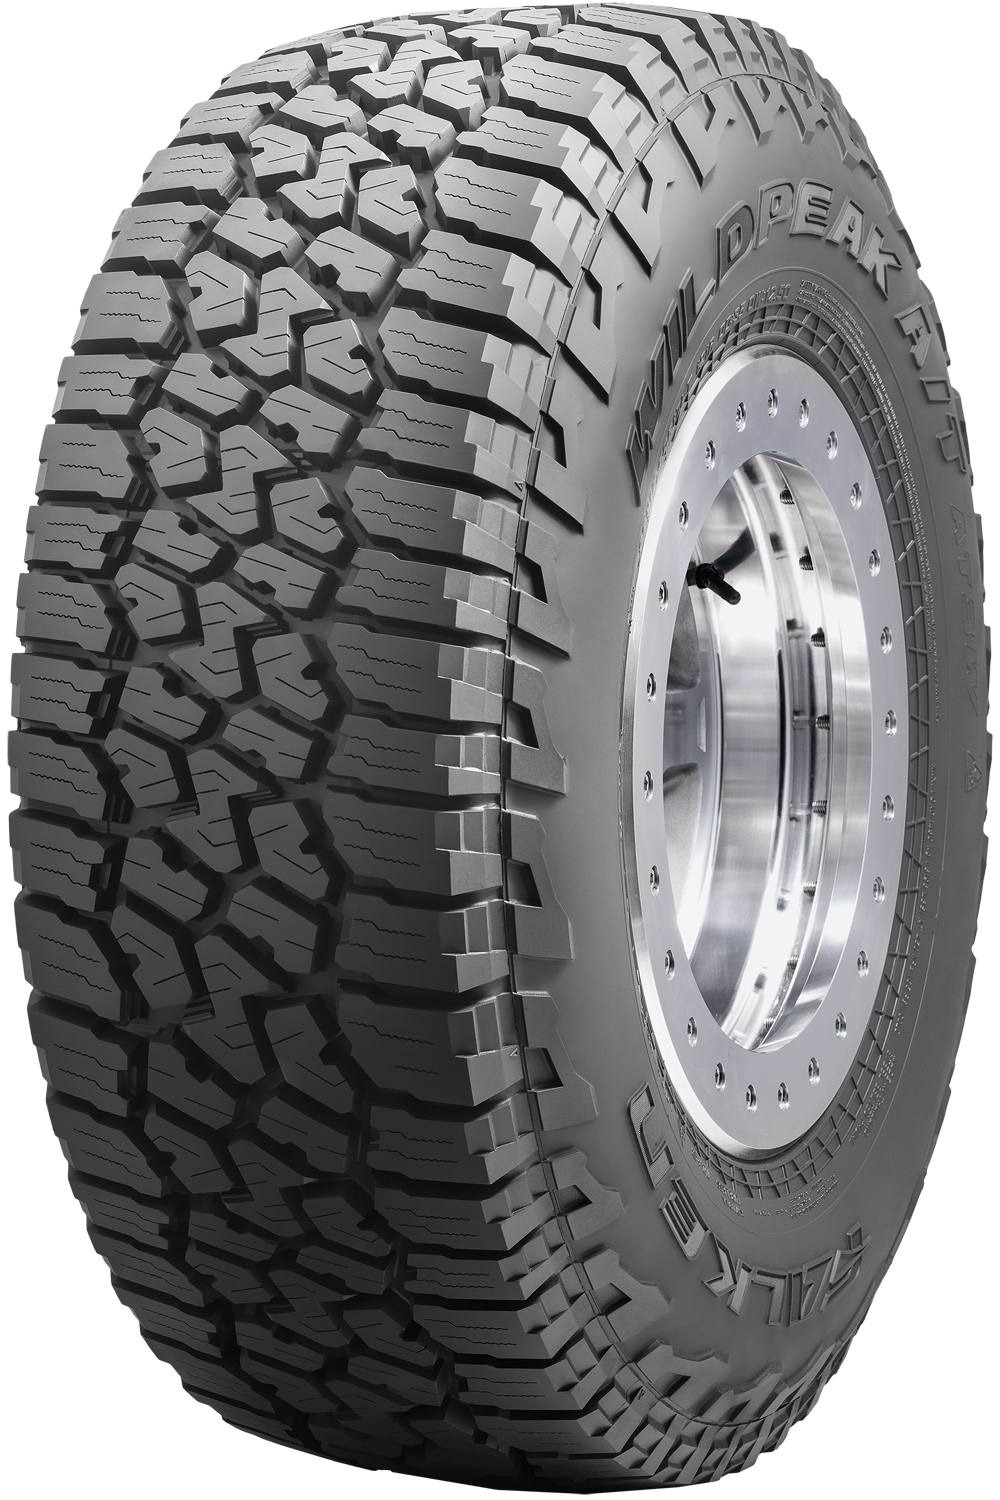 What Ply Are Falken Wildpeak At3w